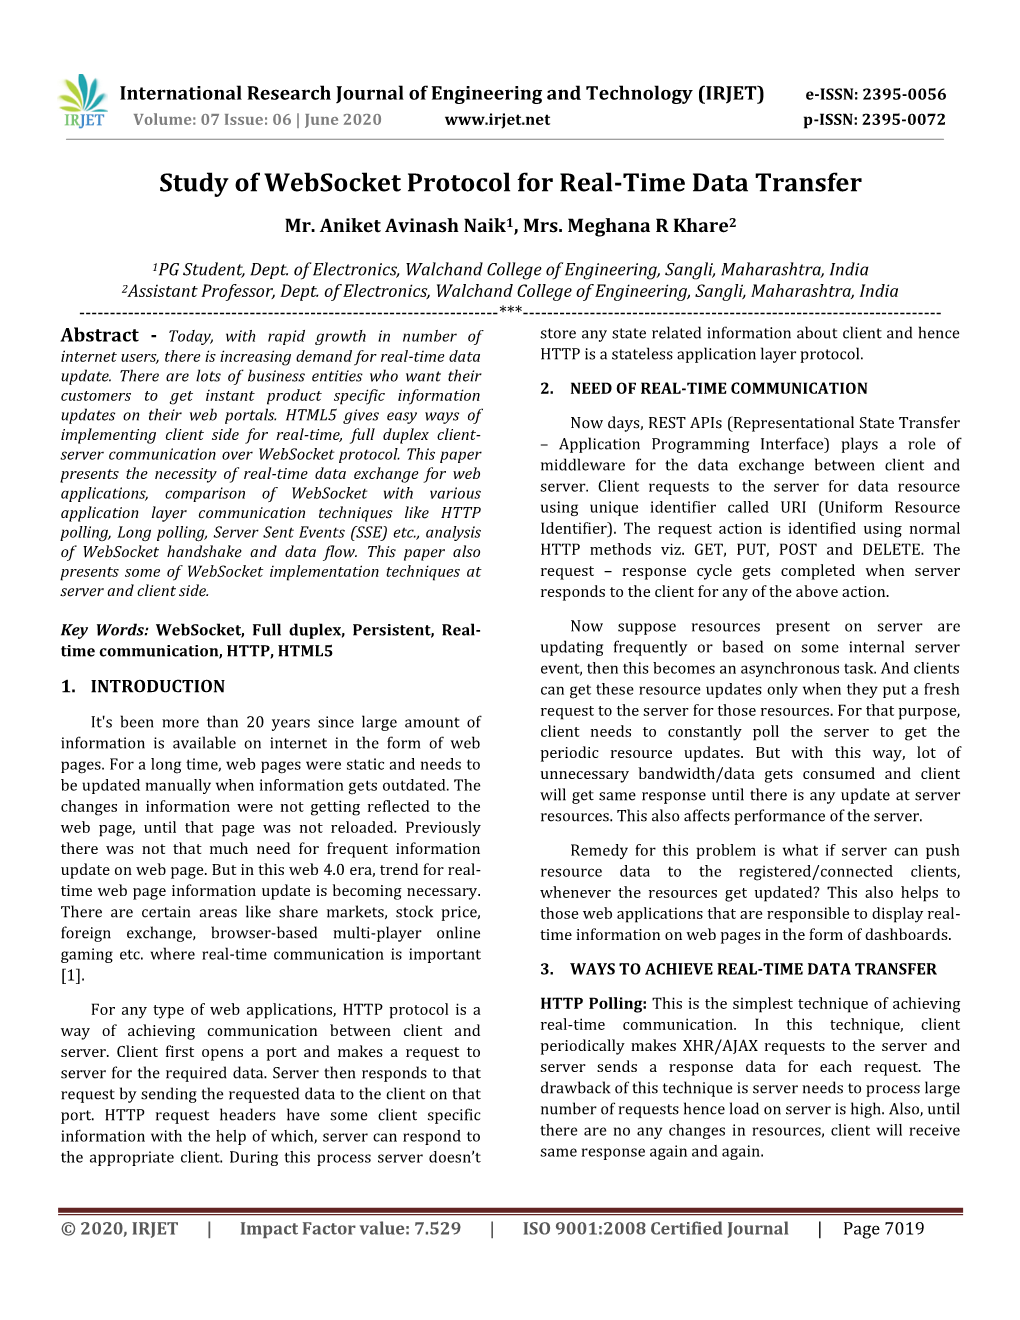 Study of Websocket Protocol for Real-Time Data Transfer Mr